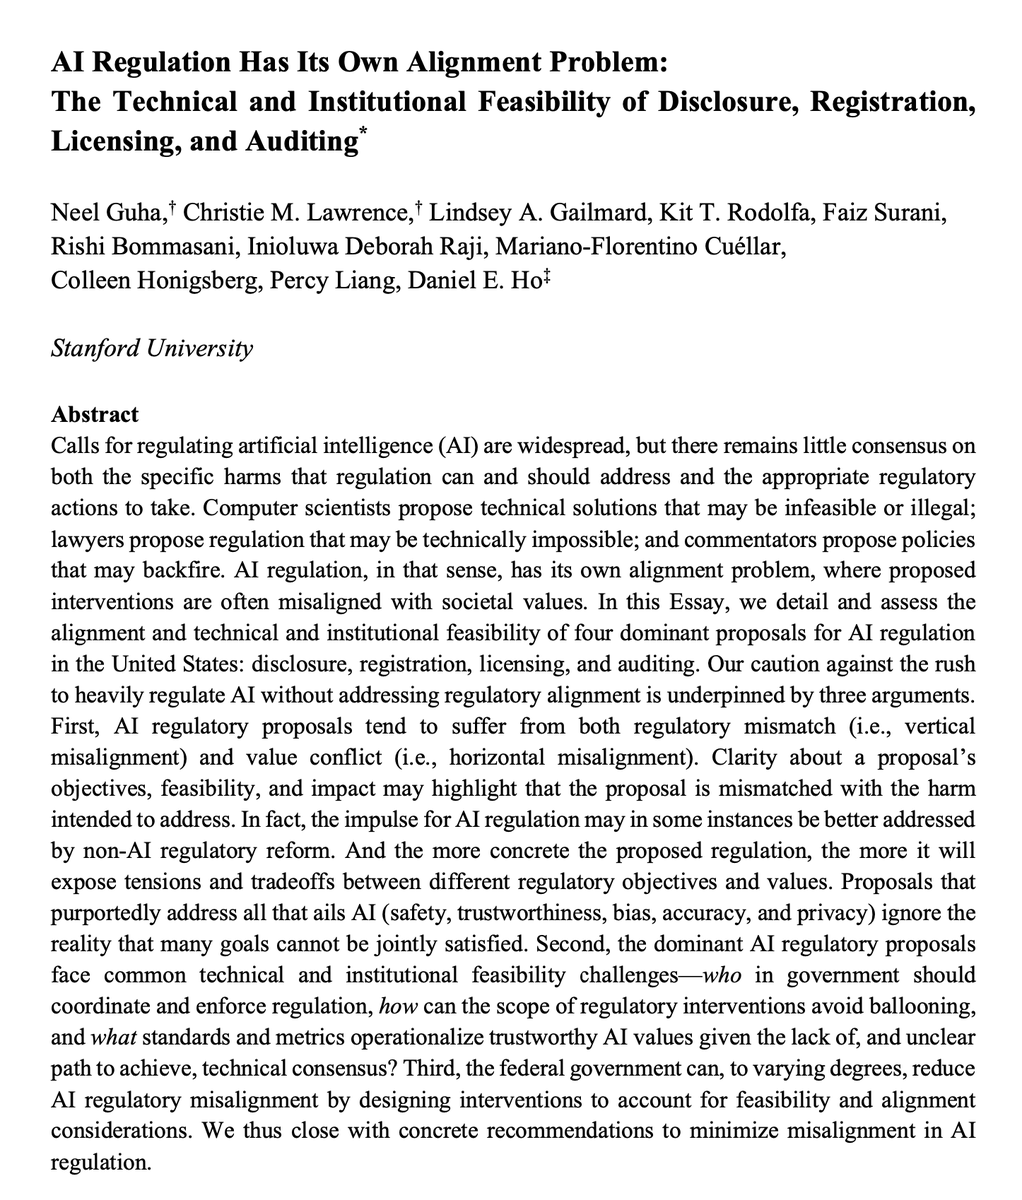 Many proposals for AI regulation are either technically or institutionally infeasible or create tradeoffs between different regulatory objectives.  In a new paper, we consider the feasibility and alignment of disclosure, registration, licensing, and auditing proposals.